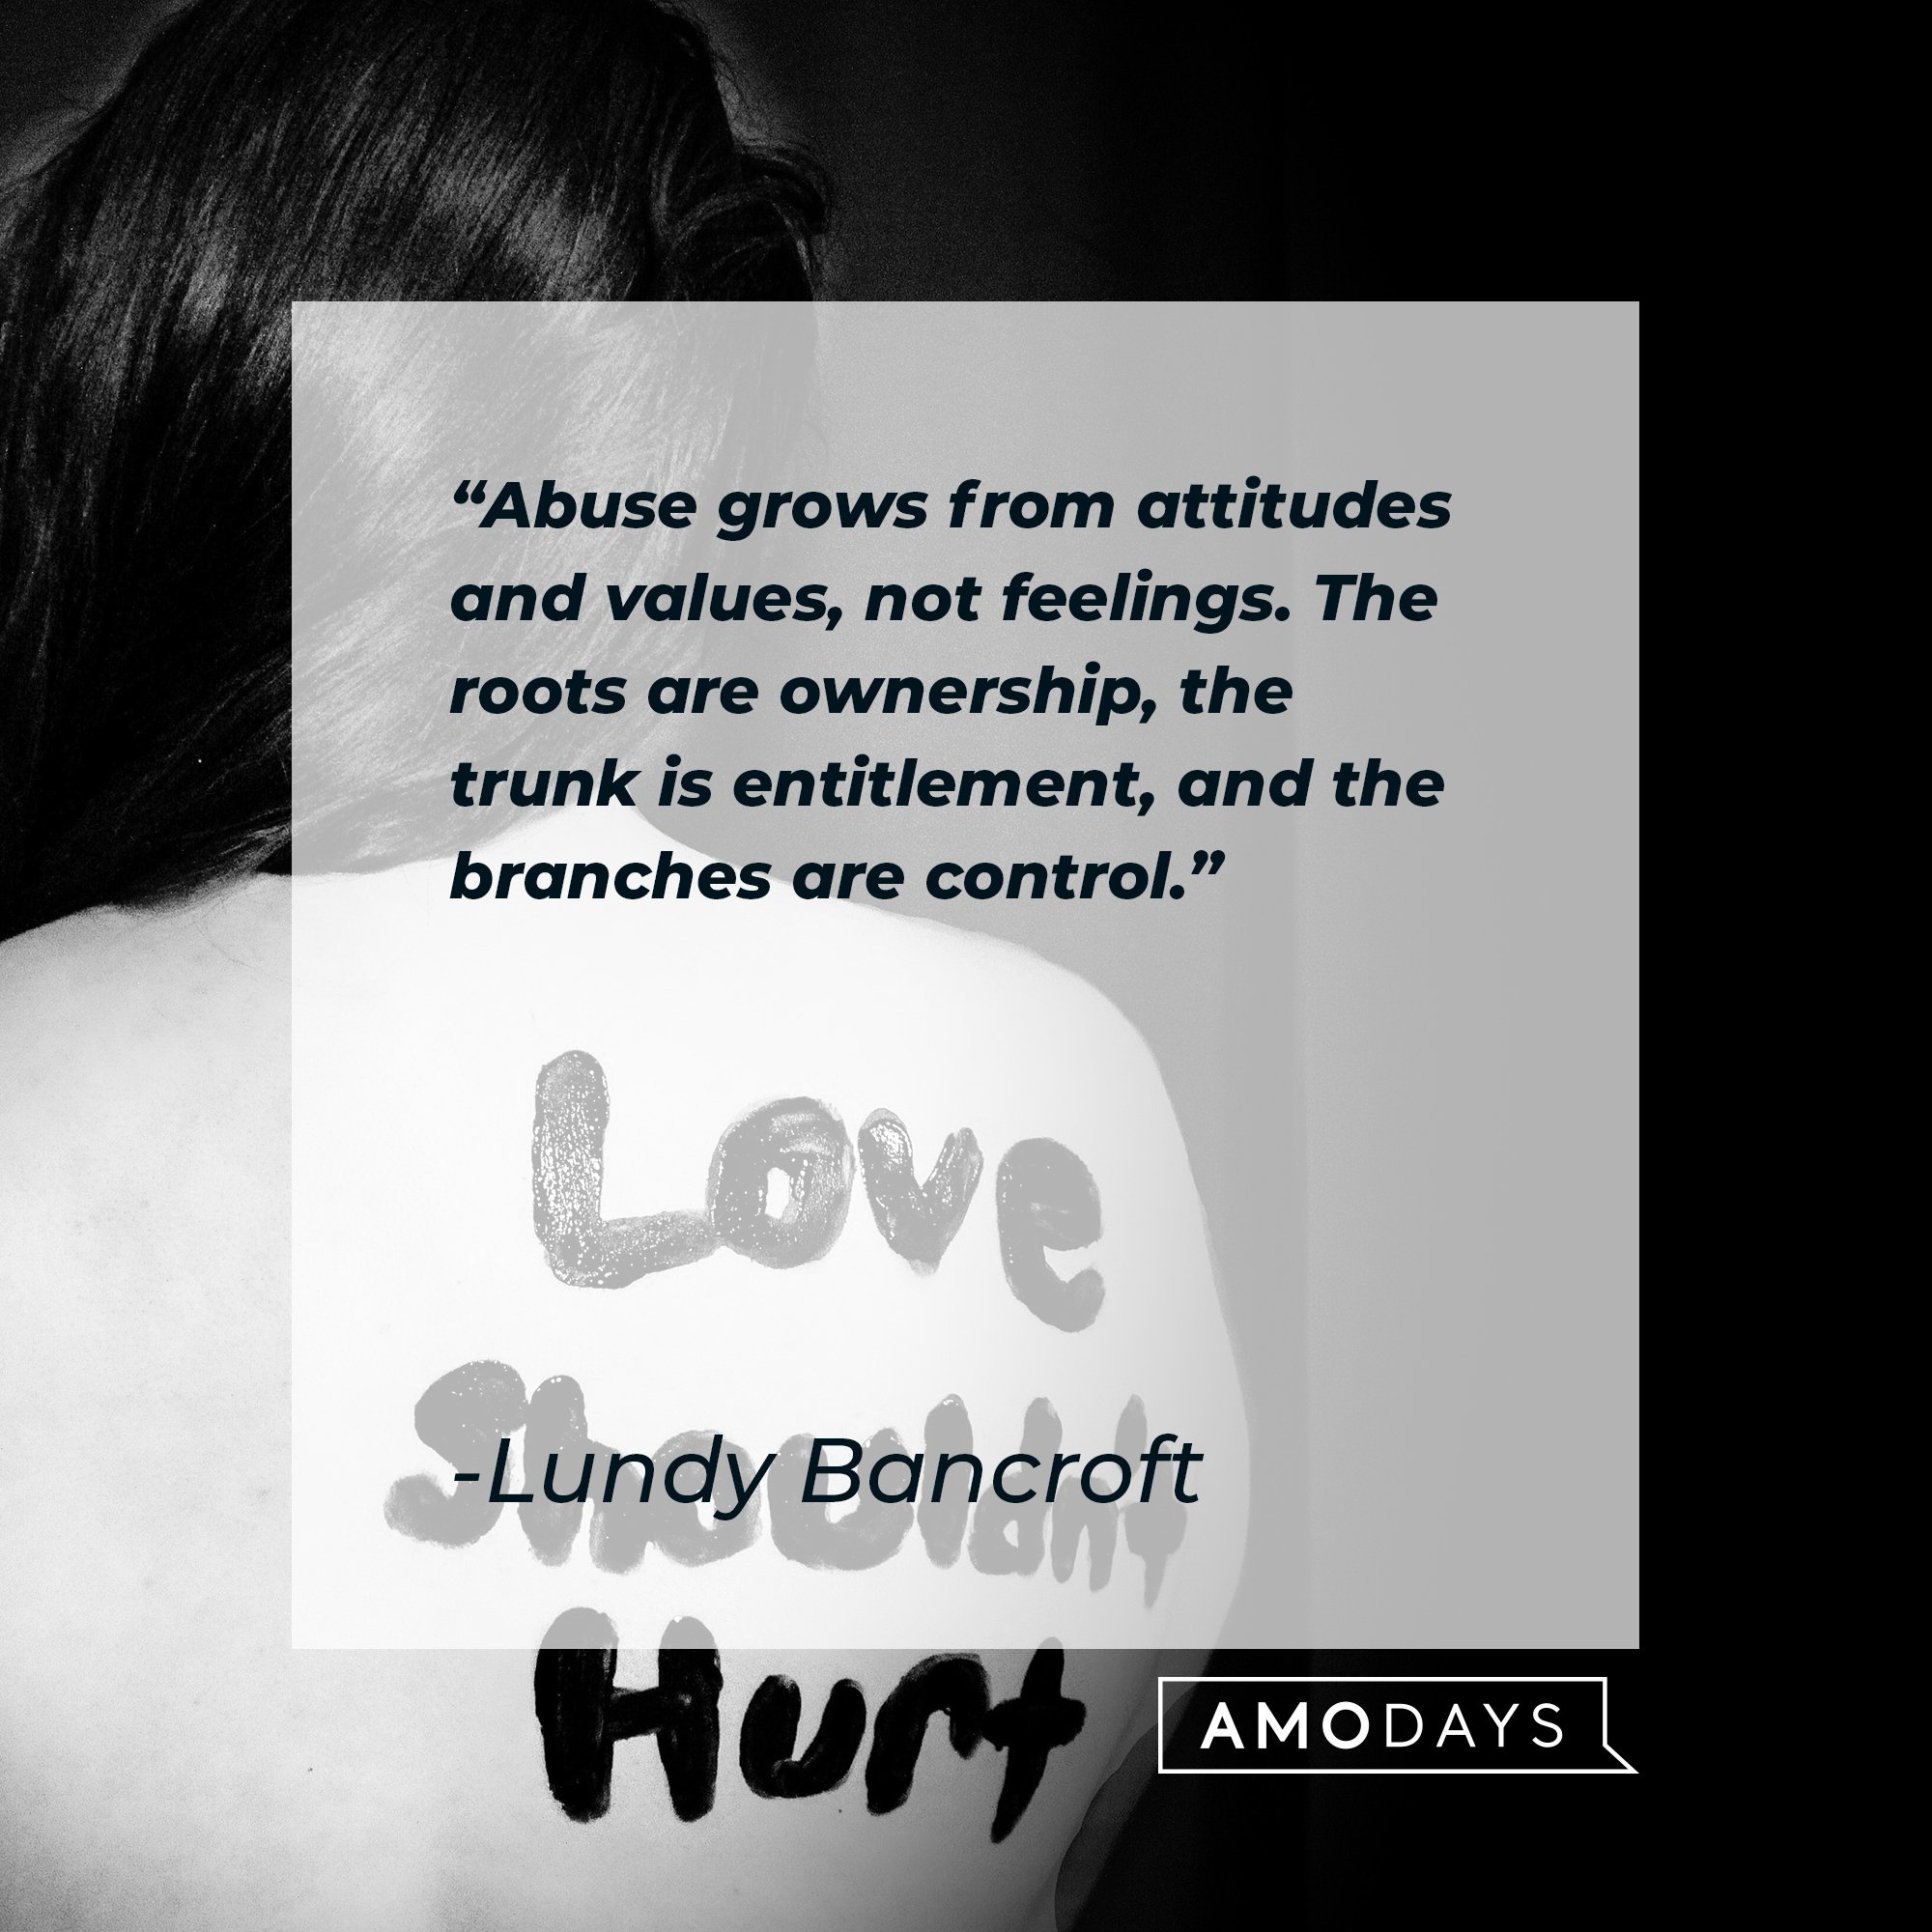 Lundy Bancroft's quote: "Abuse grows from attitudes and values, not feelings. The roots are ownership, the trunk is entitlement, and the branches are control."  | Image: AmoDays